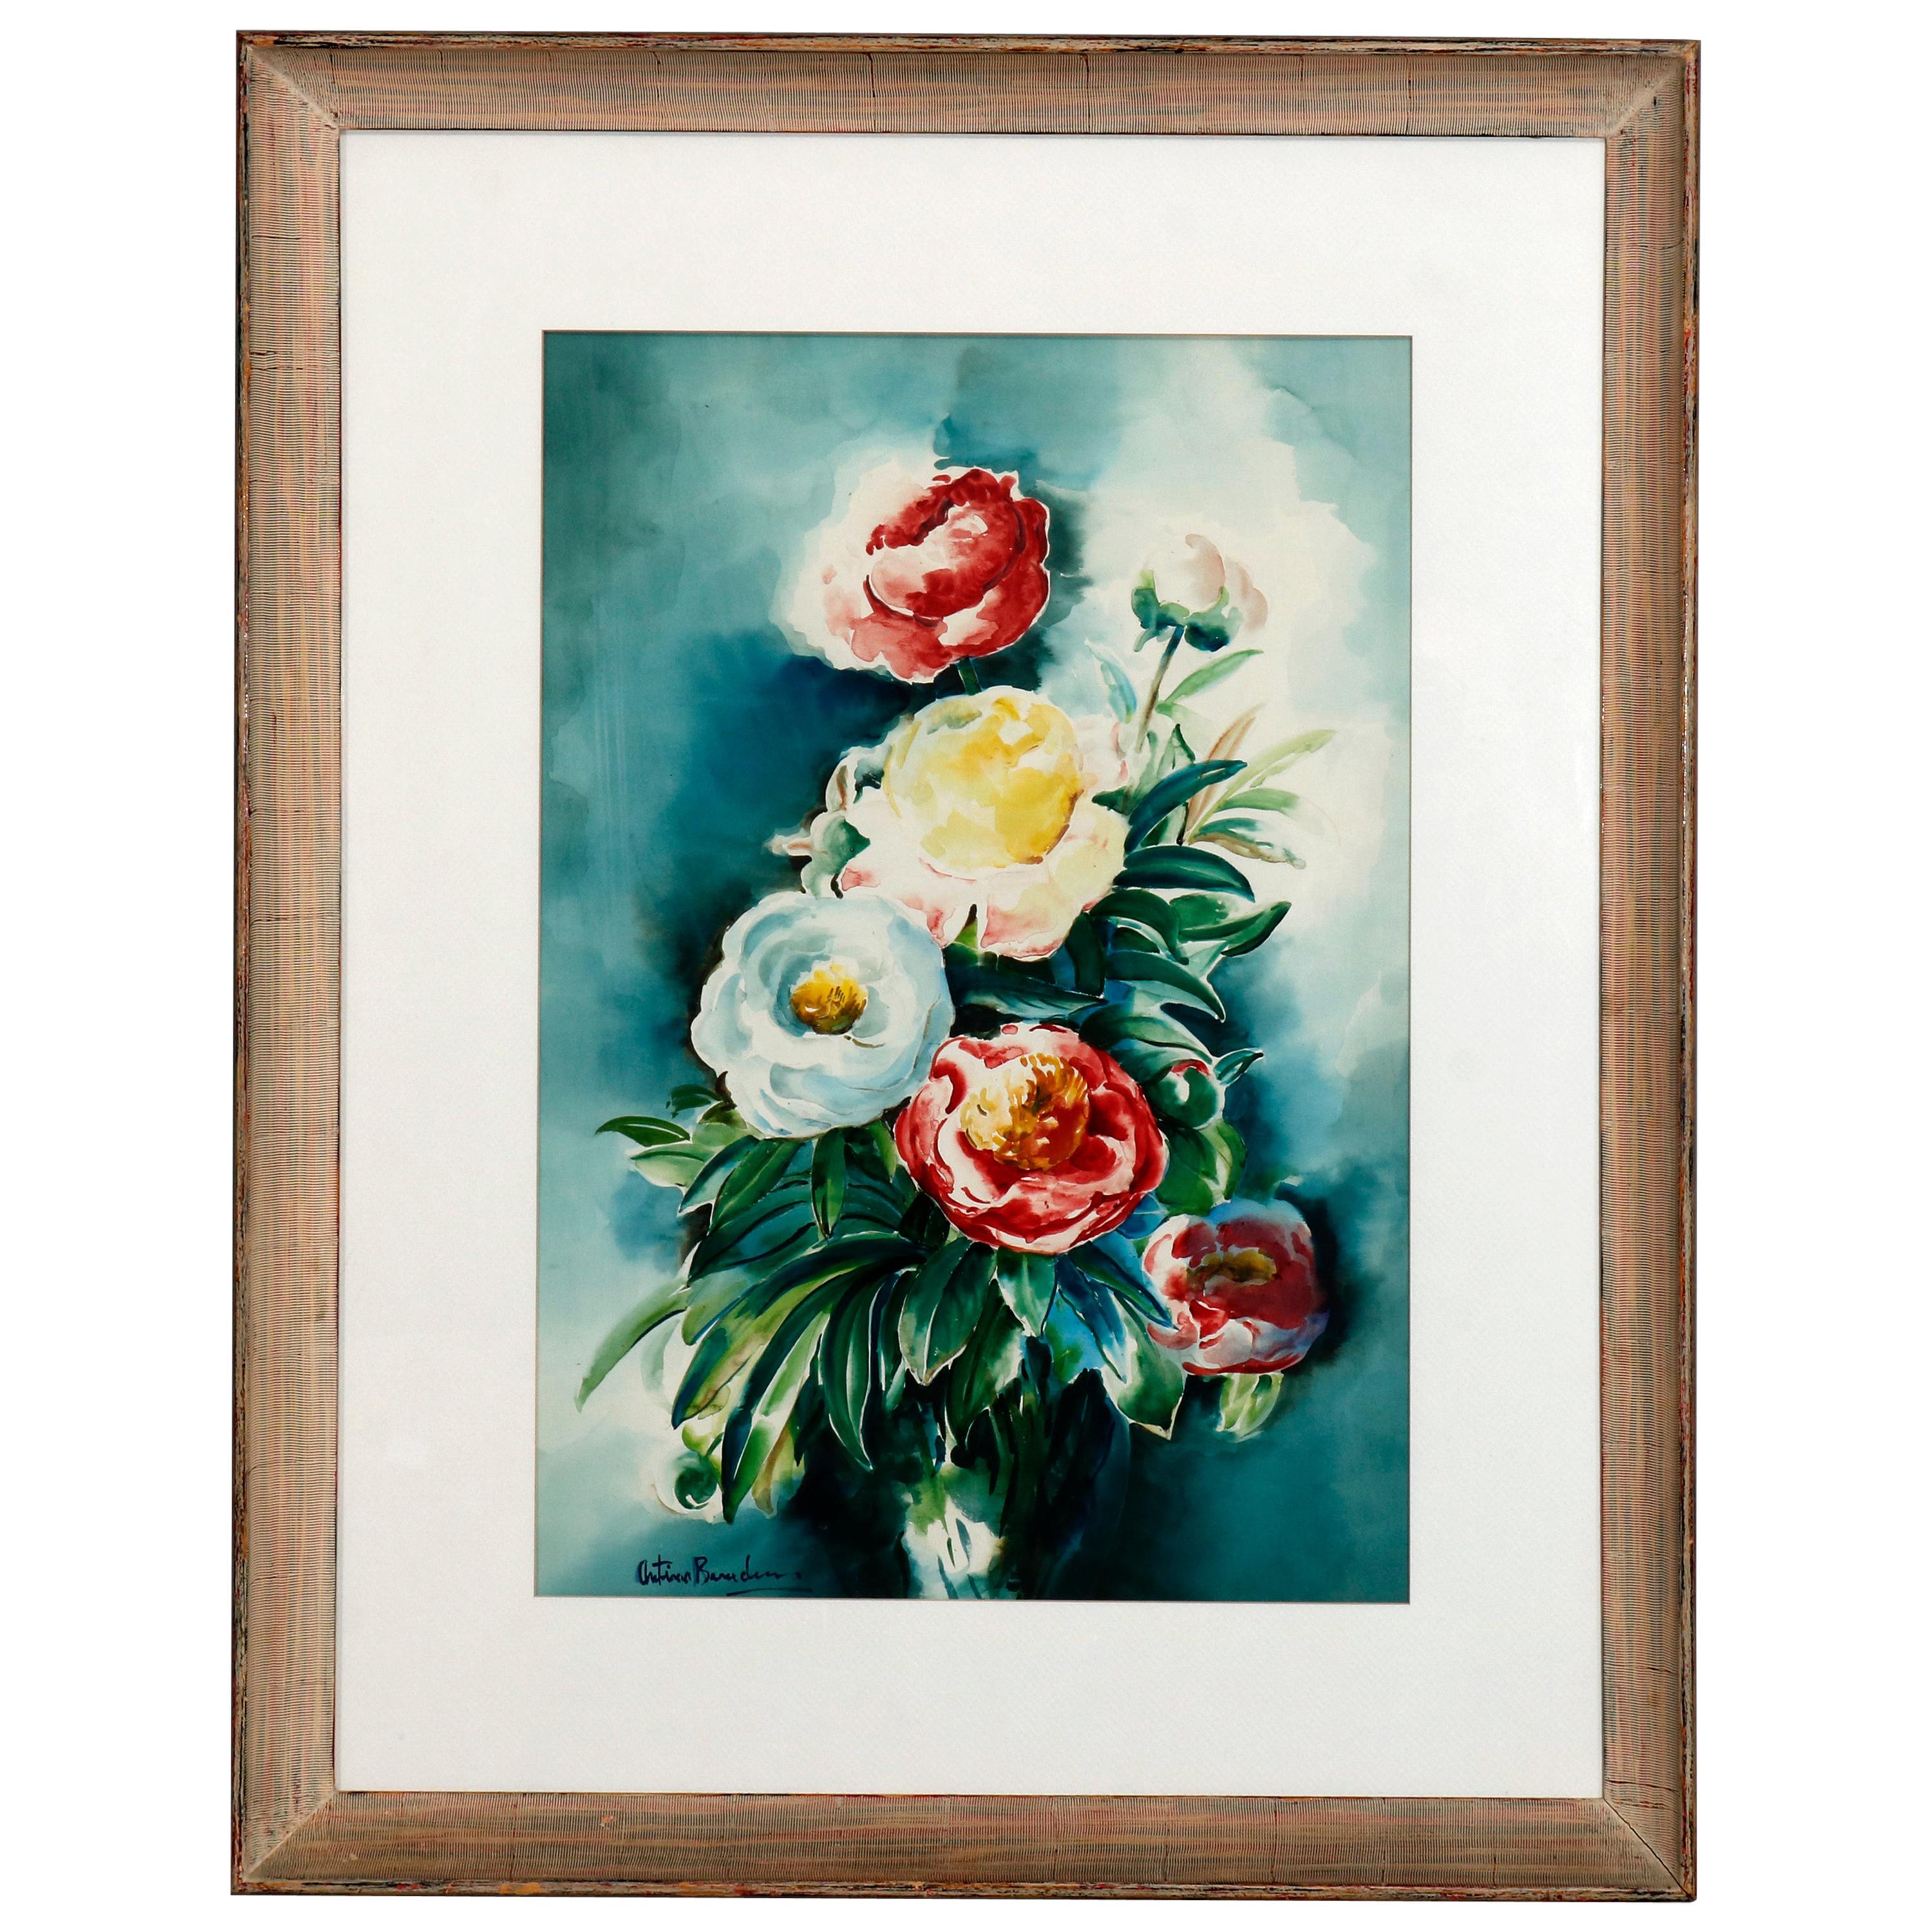 Vintage Oversized Watercolor Floral Still Life Painting Artist Signed circa 1950